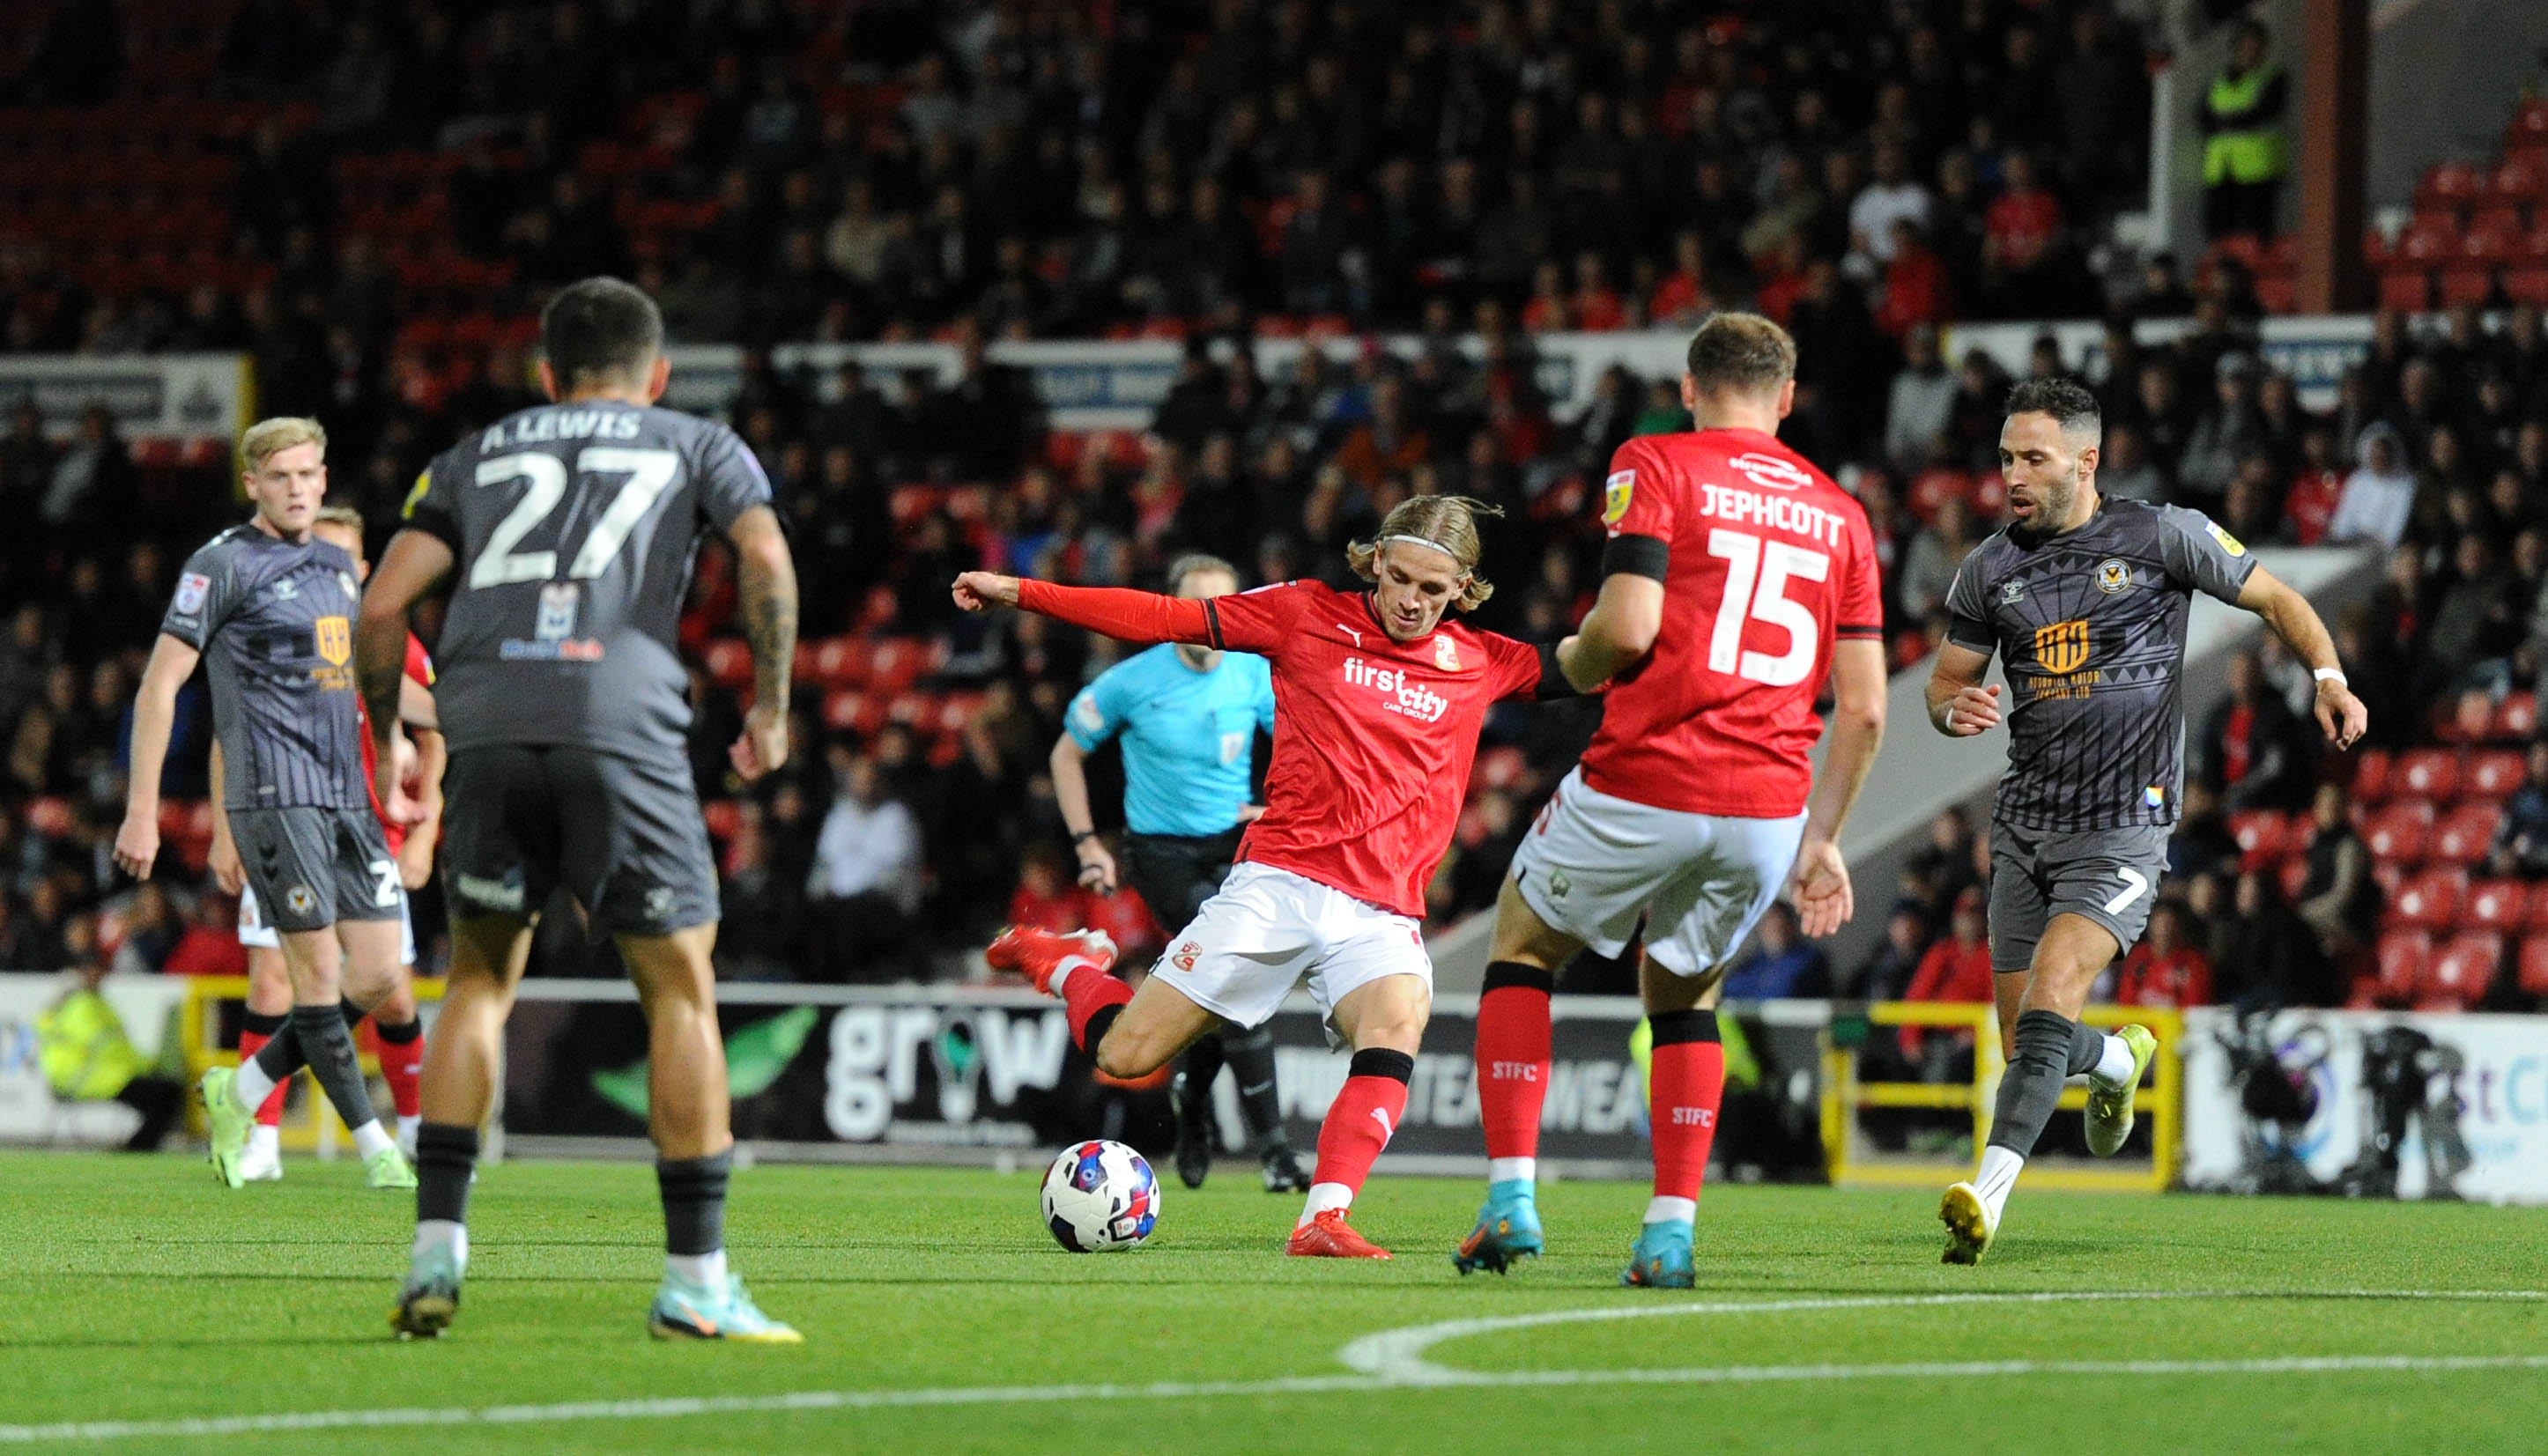 PLAYER RATINGS: Swindon (1) Tranmere Rovers (1)